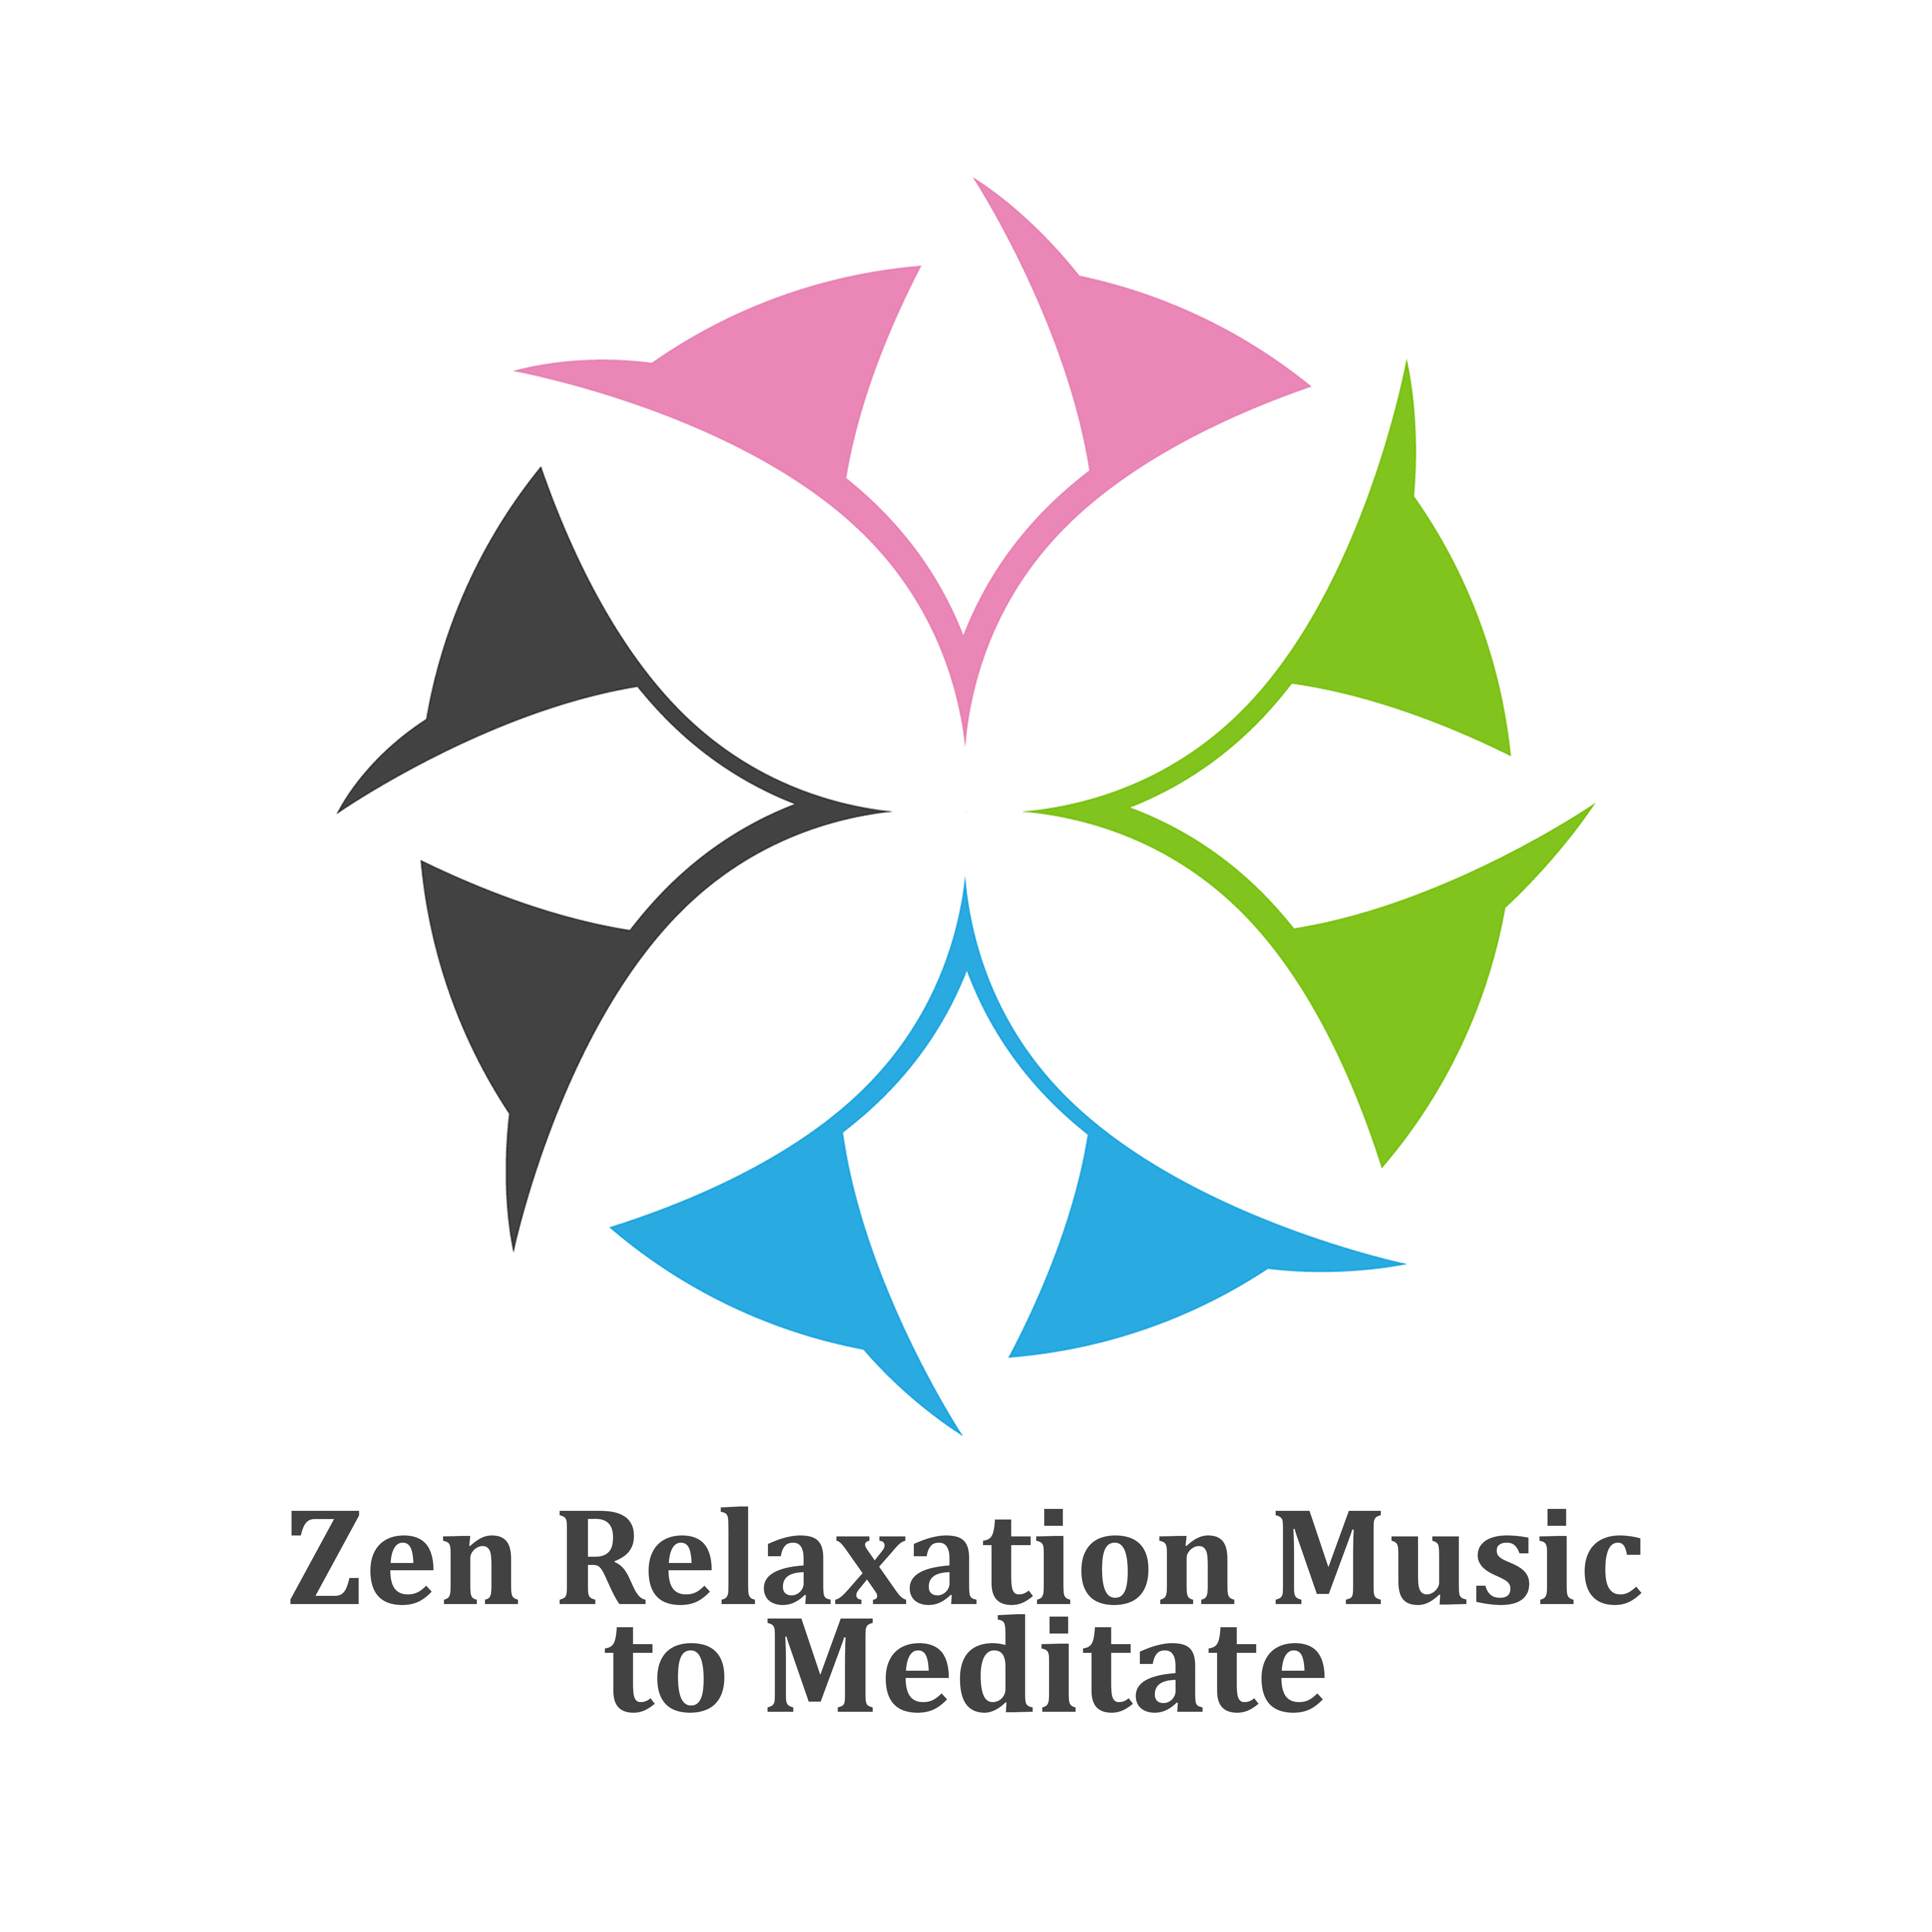 Zen Relaxation Music to Meditate